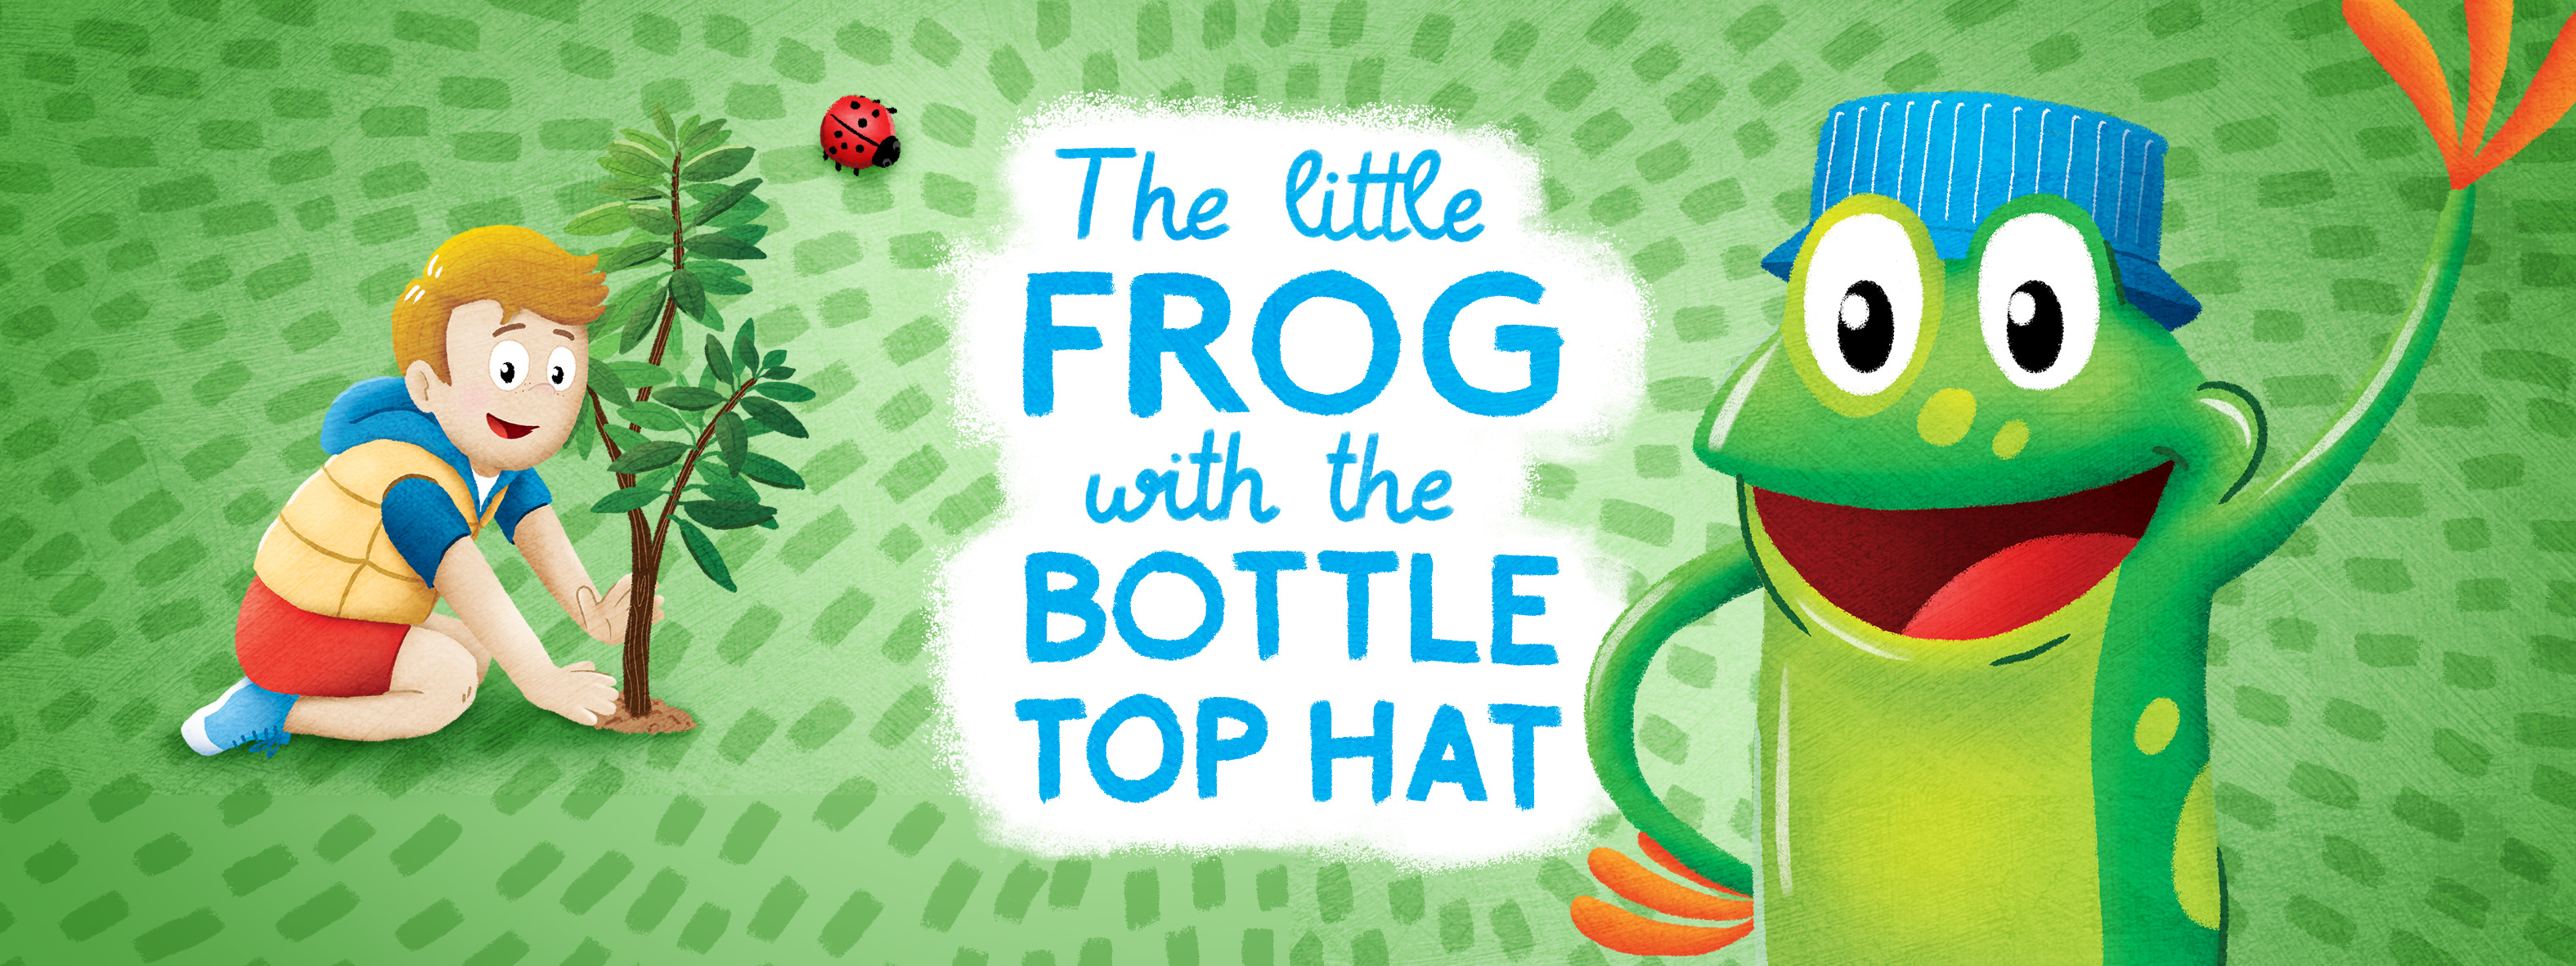 Little frog with the bottle top hat